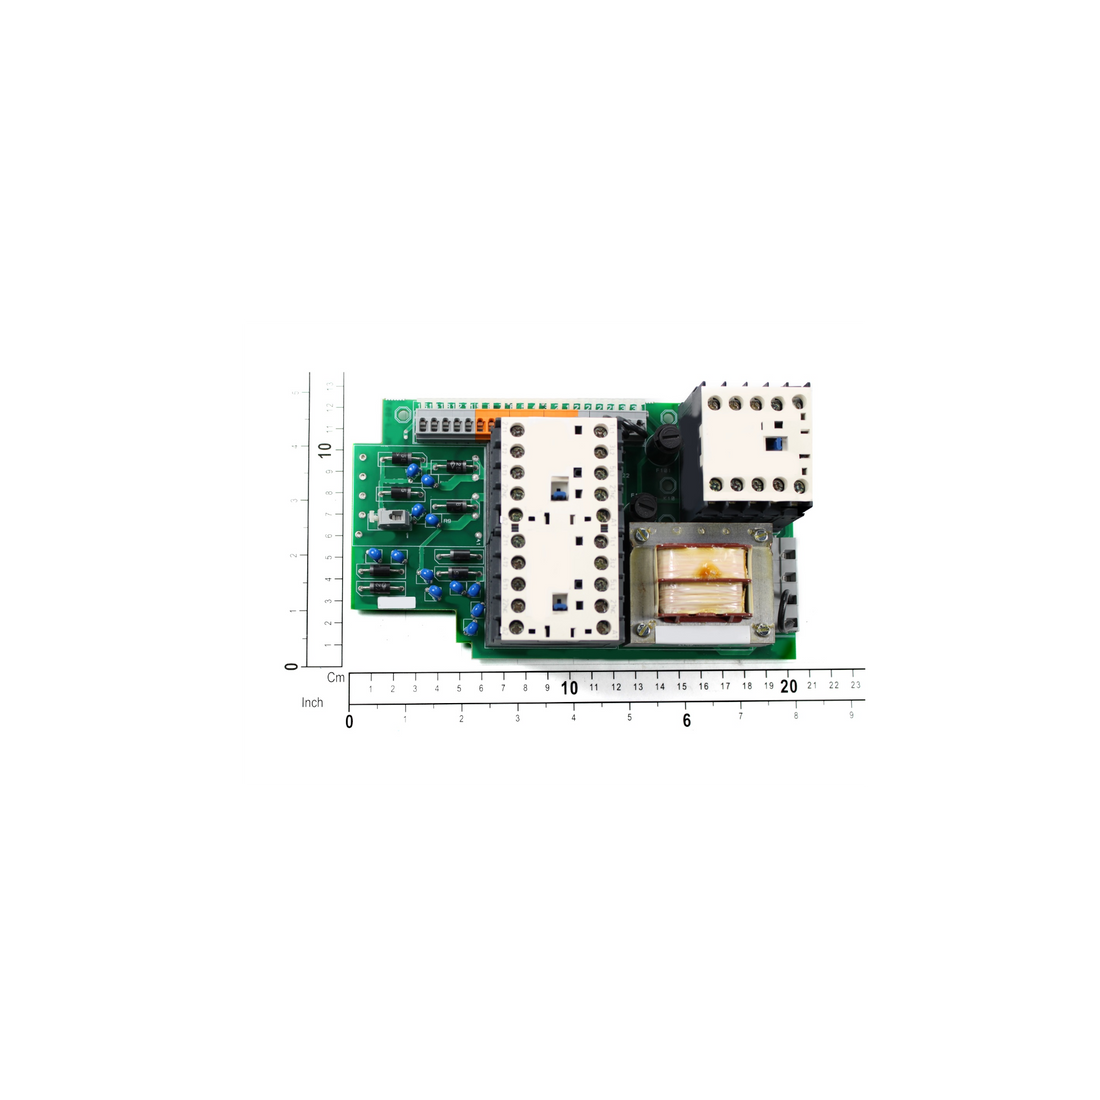 R&M Parts - Circuit Board, Part Number: 2213018